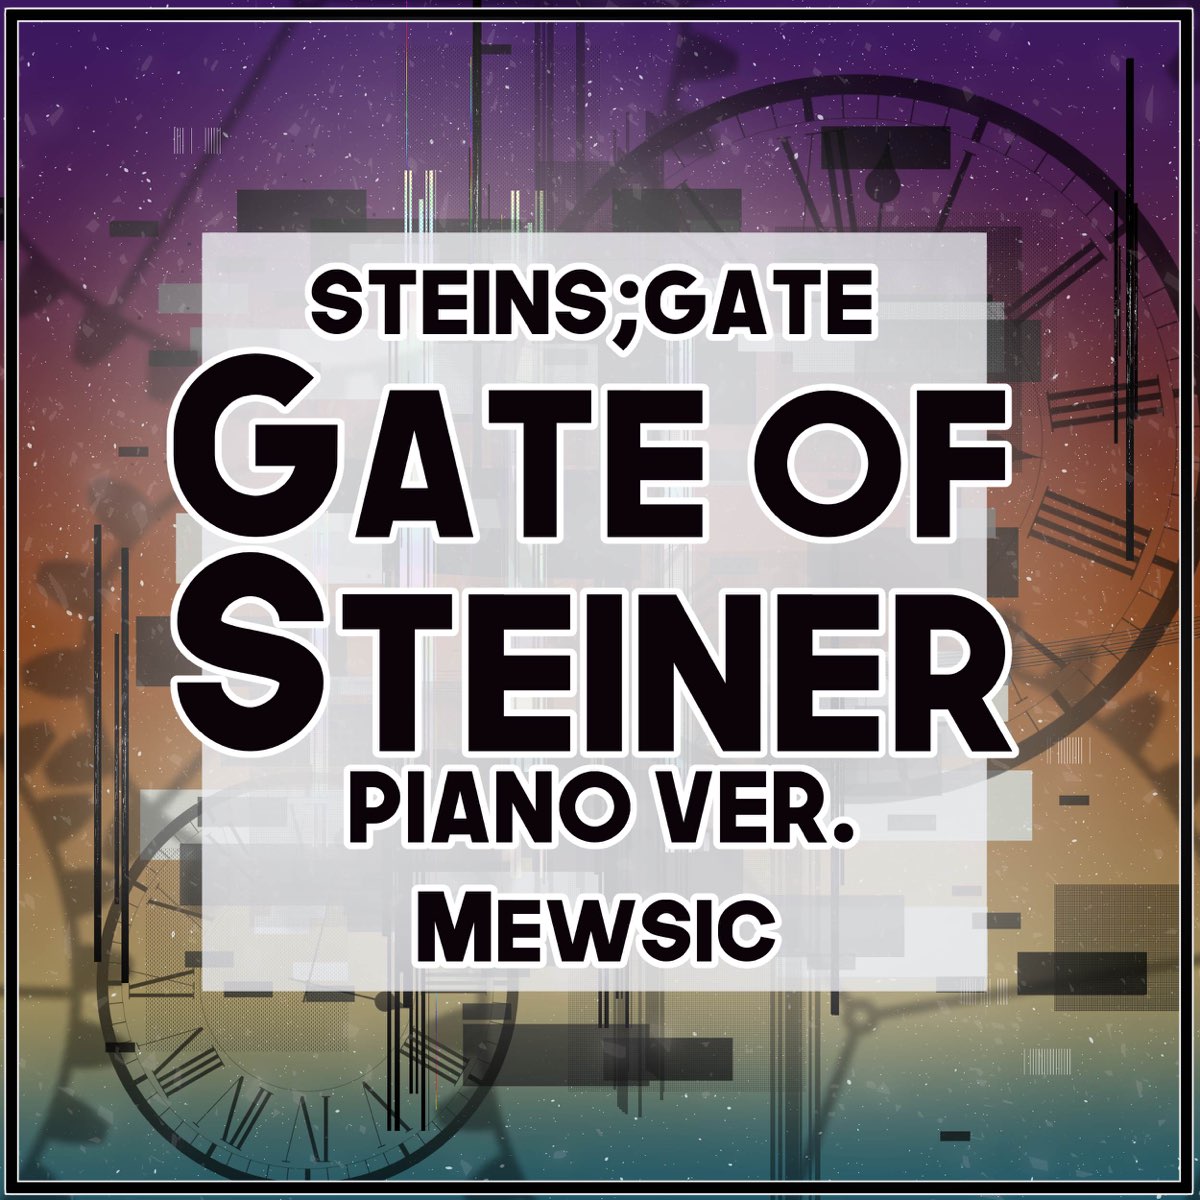 Gate of Steiner (Piano Ver.) [From "Steins;Gate"] - Single by Mewsic on  Apple Music